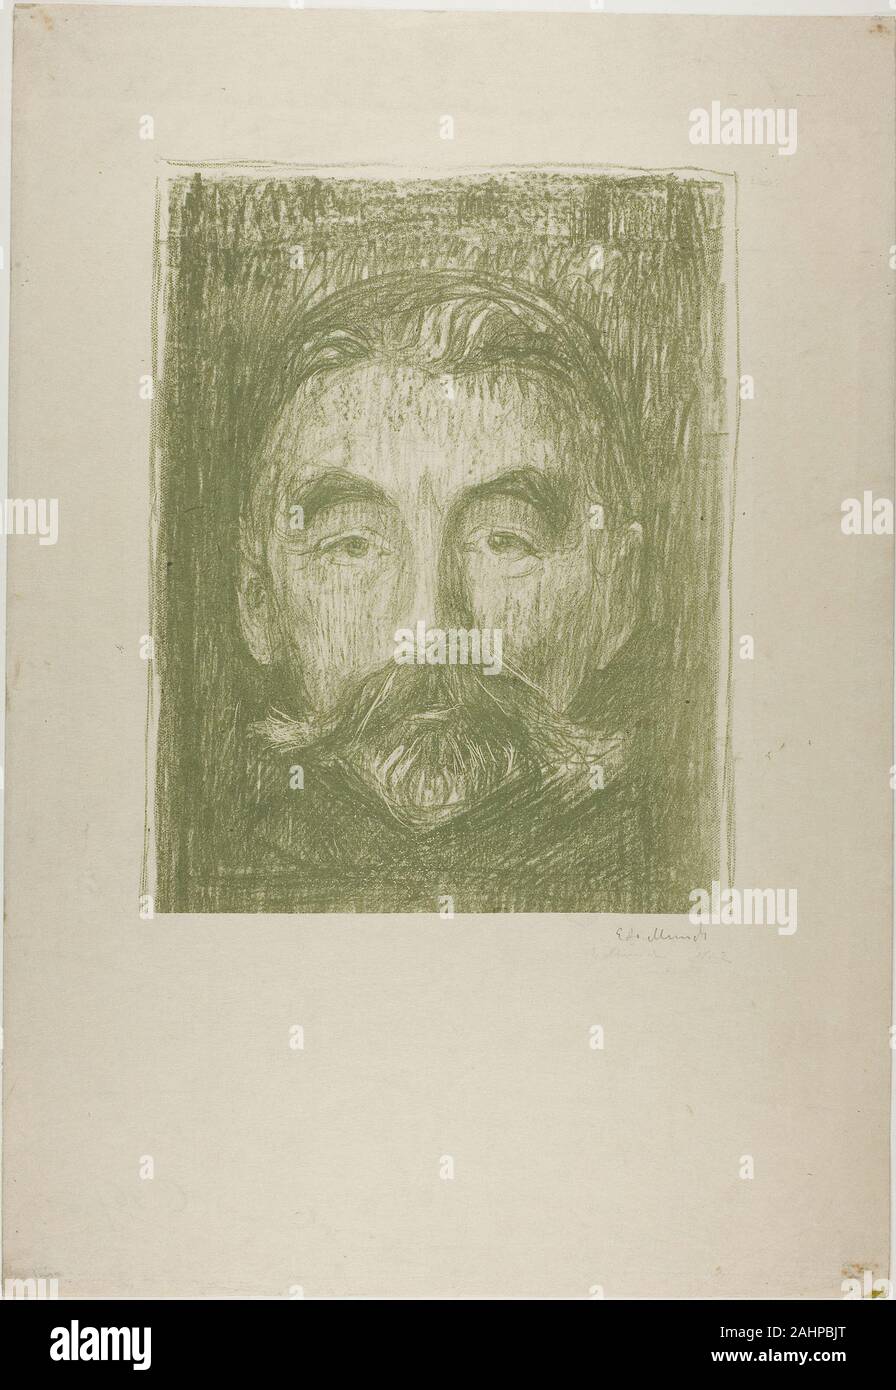 Edvard Munch. Stéphane Mallarmé. 1897. Norway. Transfer lithograph with crayon and scraping in green on cream Japanese paper Stéphane Mallarmé is today considered one of France’s most important poets of the second half of the nineteenth century. Although he was known for the obscure imagery and difficult syntax of his verse, Mallarmé enjoyed the friendship of other modern thinkers, in particular, Impressionist and Post-Impressionist artists such as Édouard Manet, Pierre-Auguste Renoir, Odilon Redon, Edgar Degas, Paul Gauguin, and James McNeill Whistler. Despite the fact that much of his poetry Stock Photo